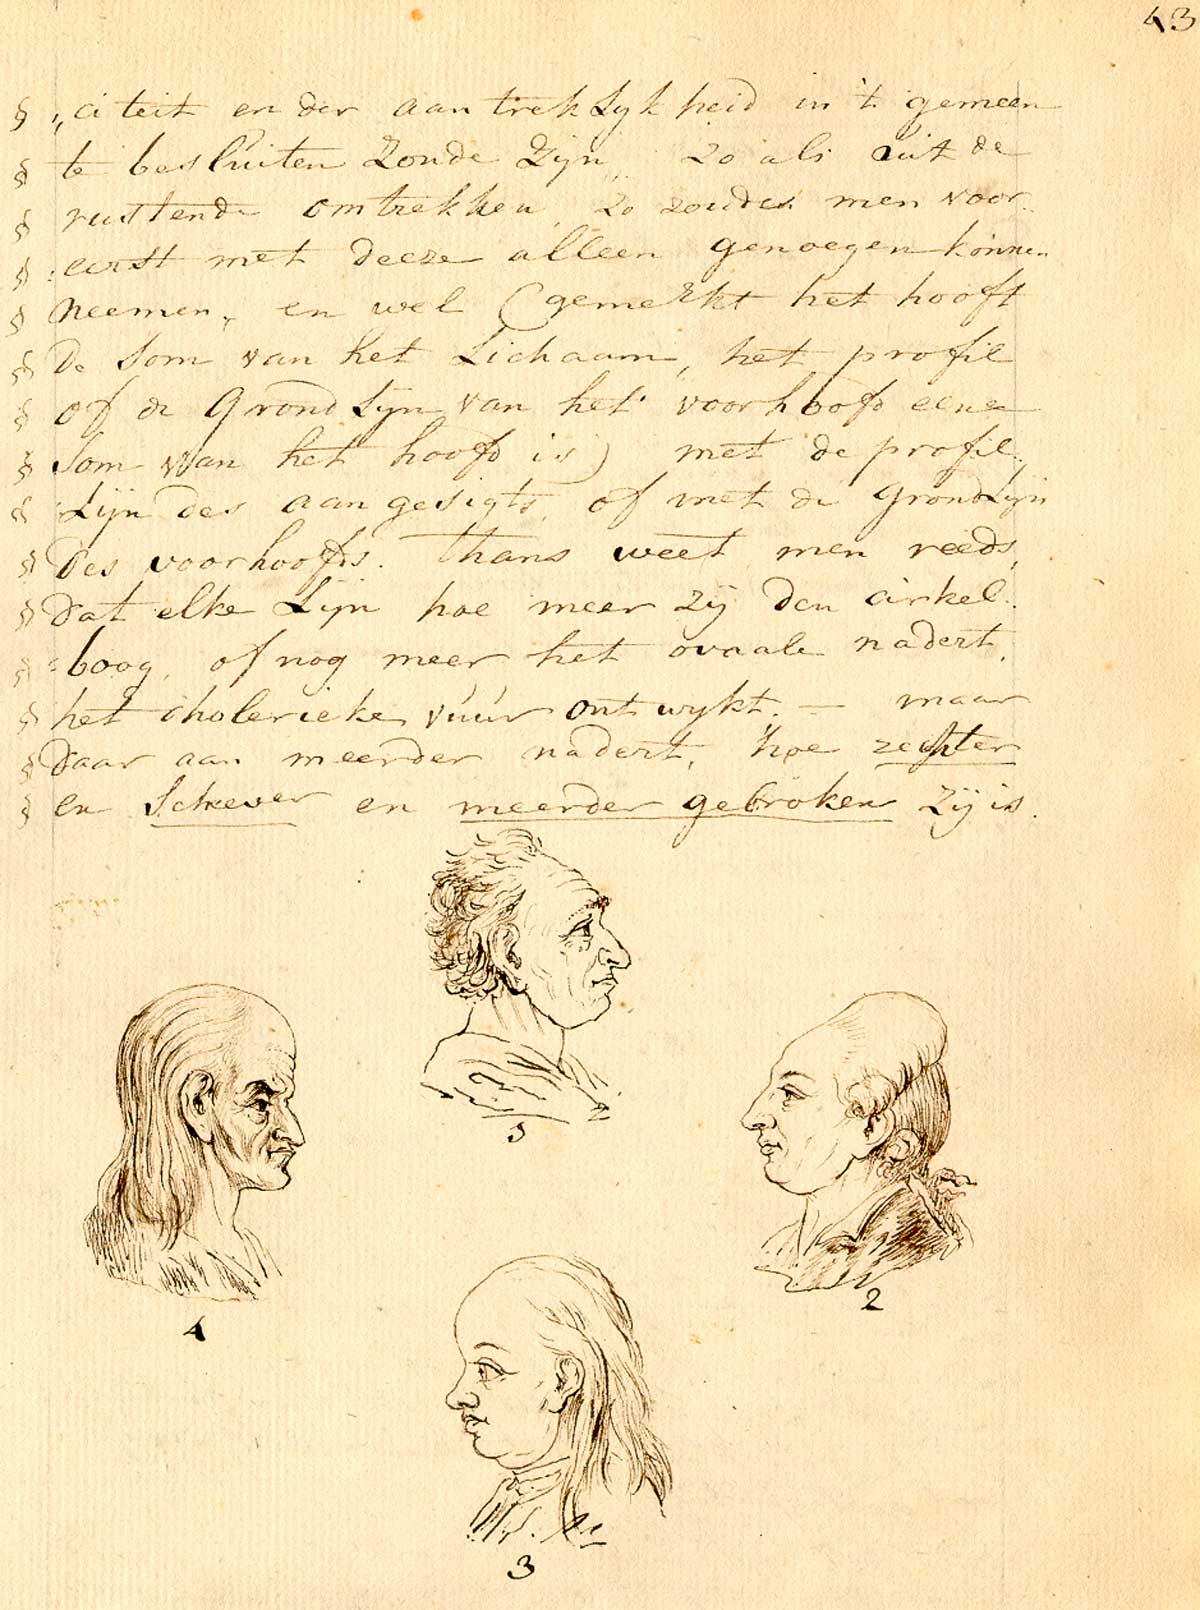 Manuscript drawing of four male heads at the bottom of the page, two facing the left and two facing the right, with text in Dutch at the top half of the page, from Anonymous treatise on physiognomy, NLM call no.: MS B 662.